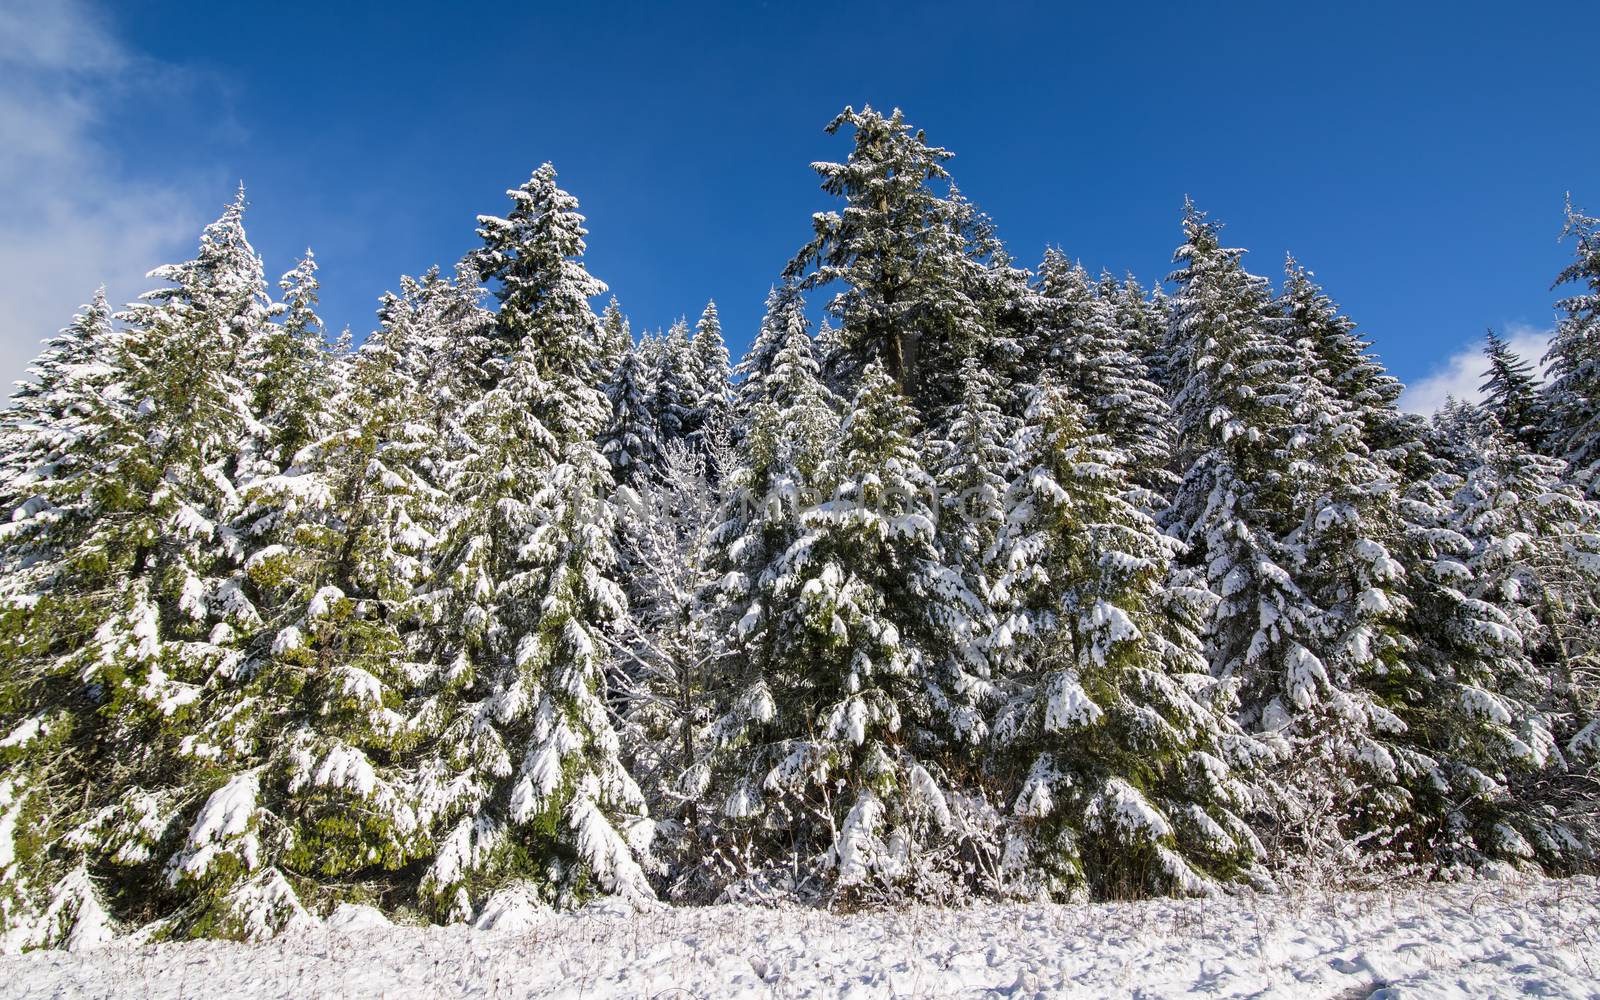 Snow-Covered Trees Under Blue Skies and Clouds